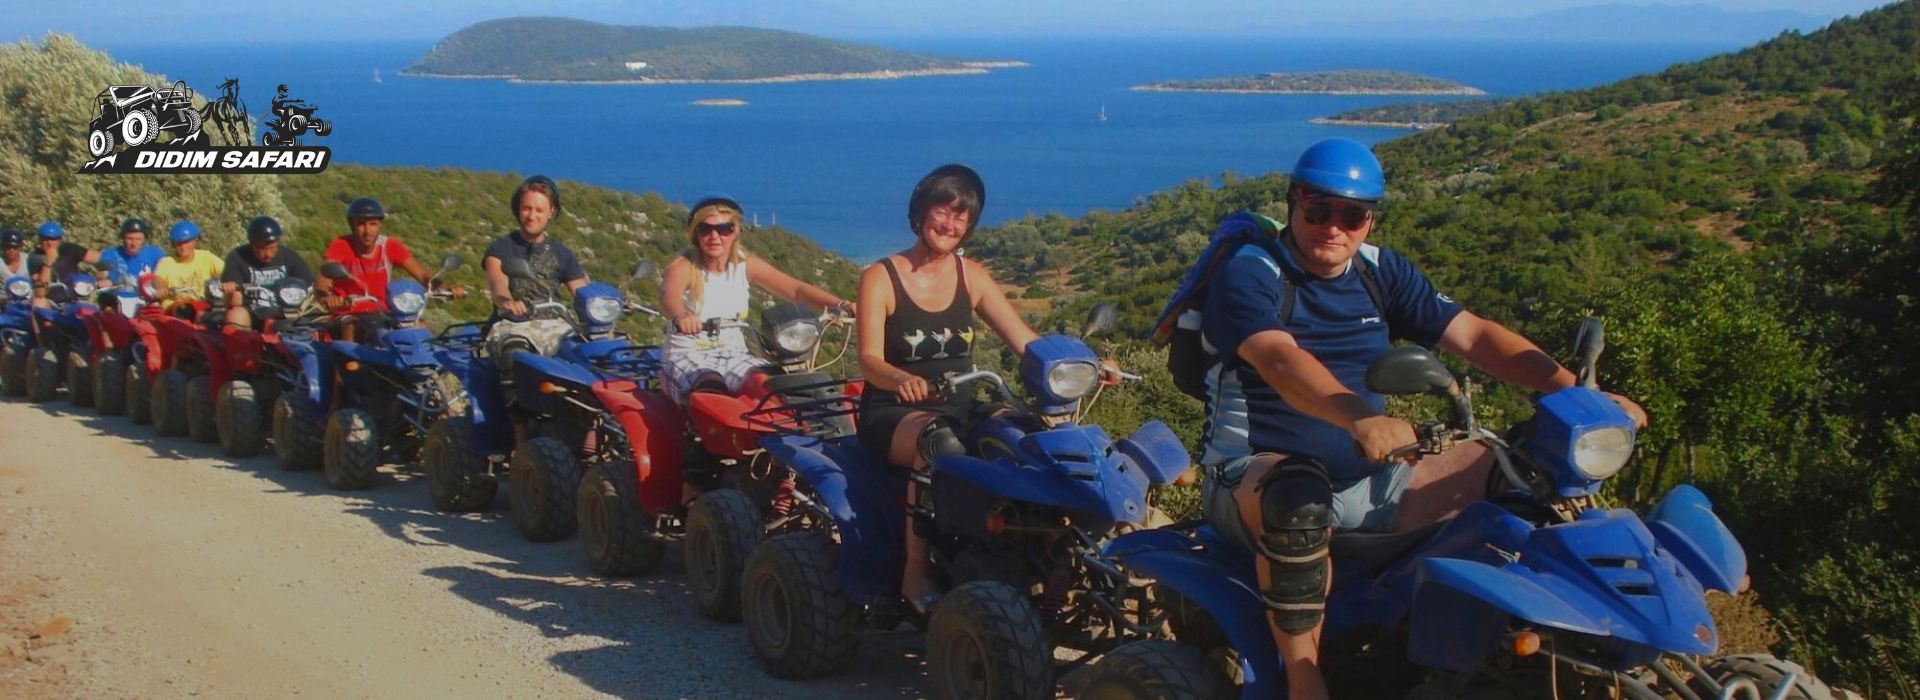 DidIm Quad Safari offers you an unforgettable experience to highlight your holiday in Didim. This muddy, wet and dusty excursion is really exciting and lots of fun.